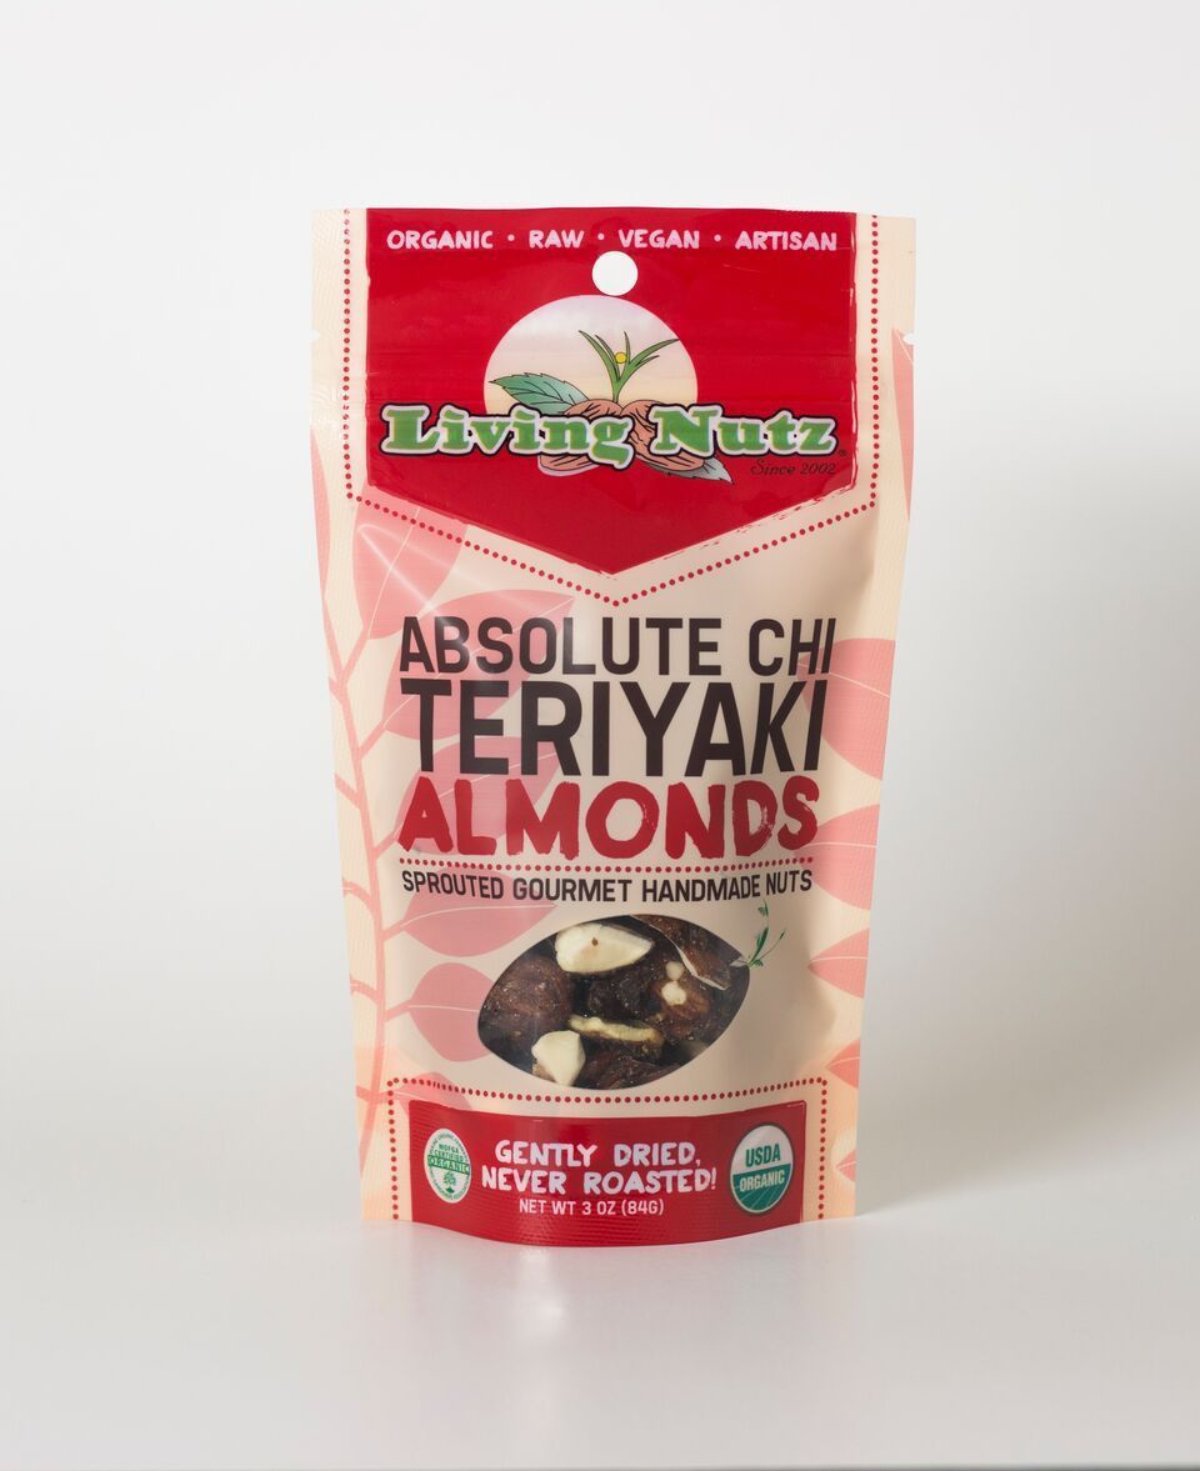 Organic raw sprouted nuts. Teriyaki flavored almonds. unpasteurized almonds